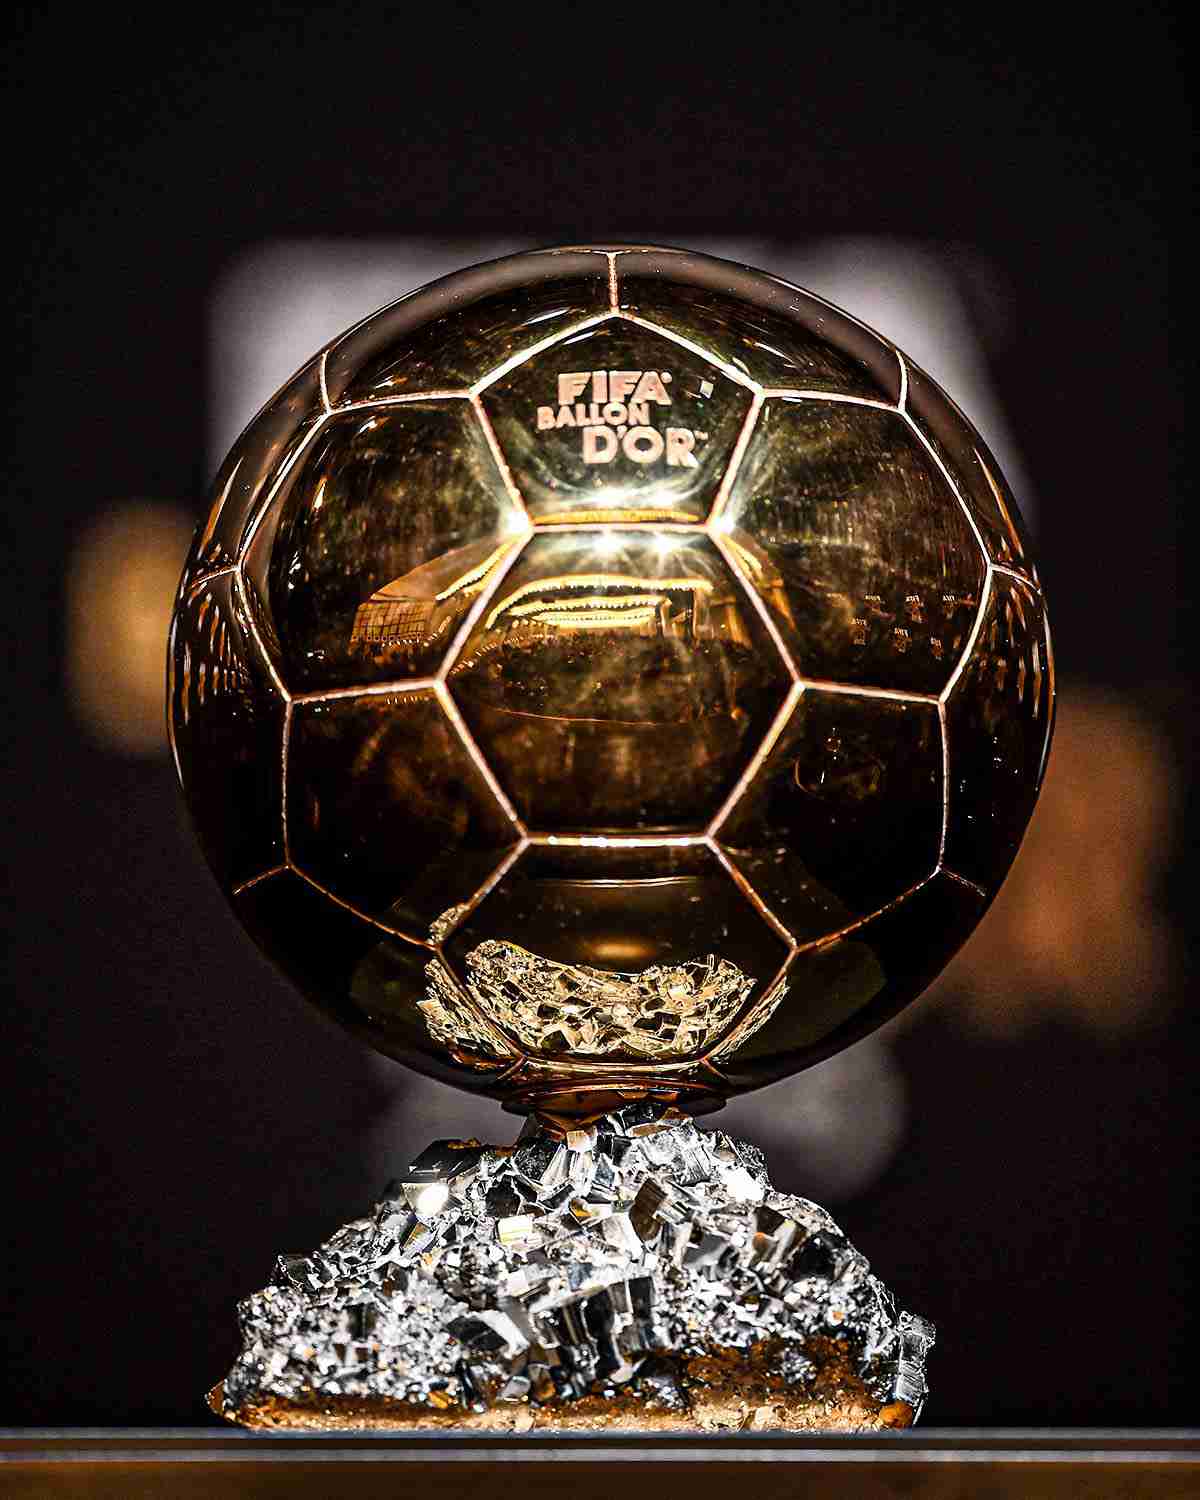 Full Guide To The 2022 Ballon d’Or